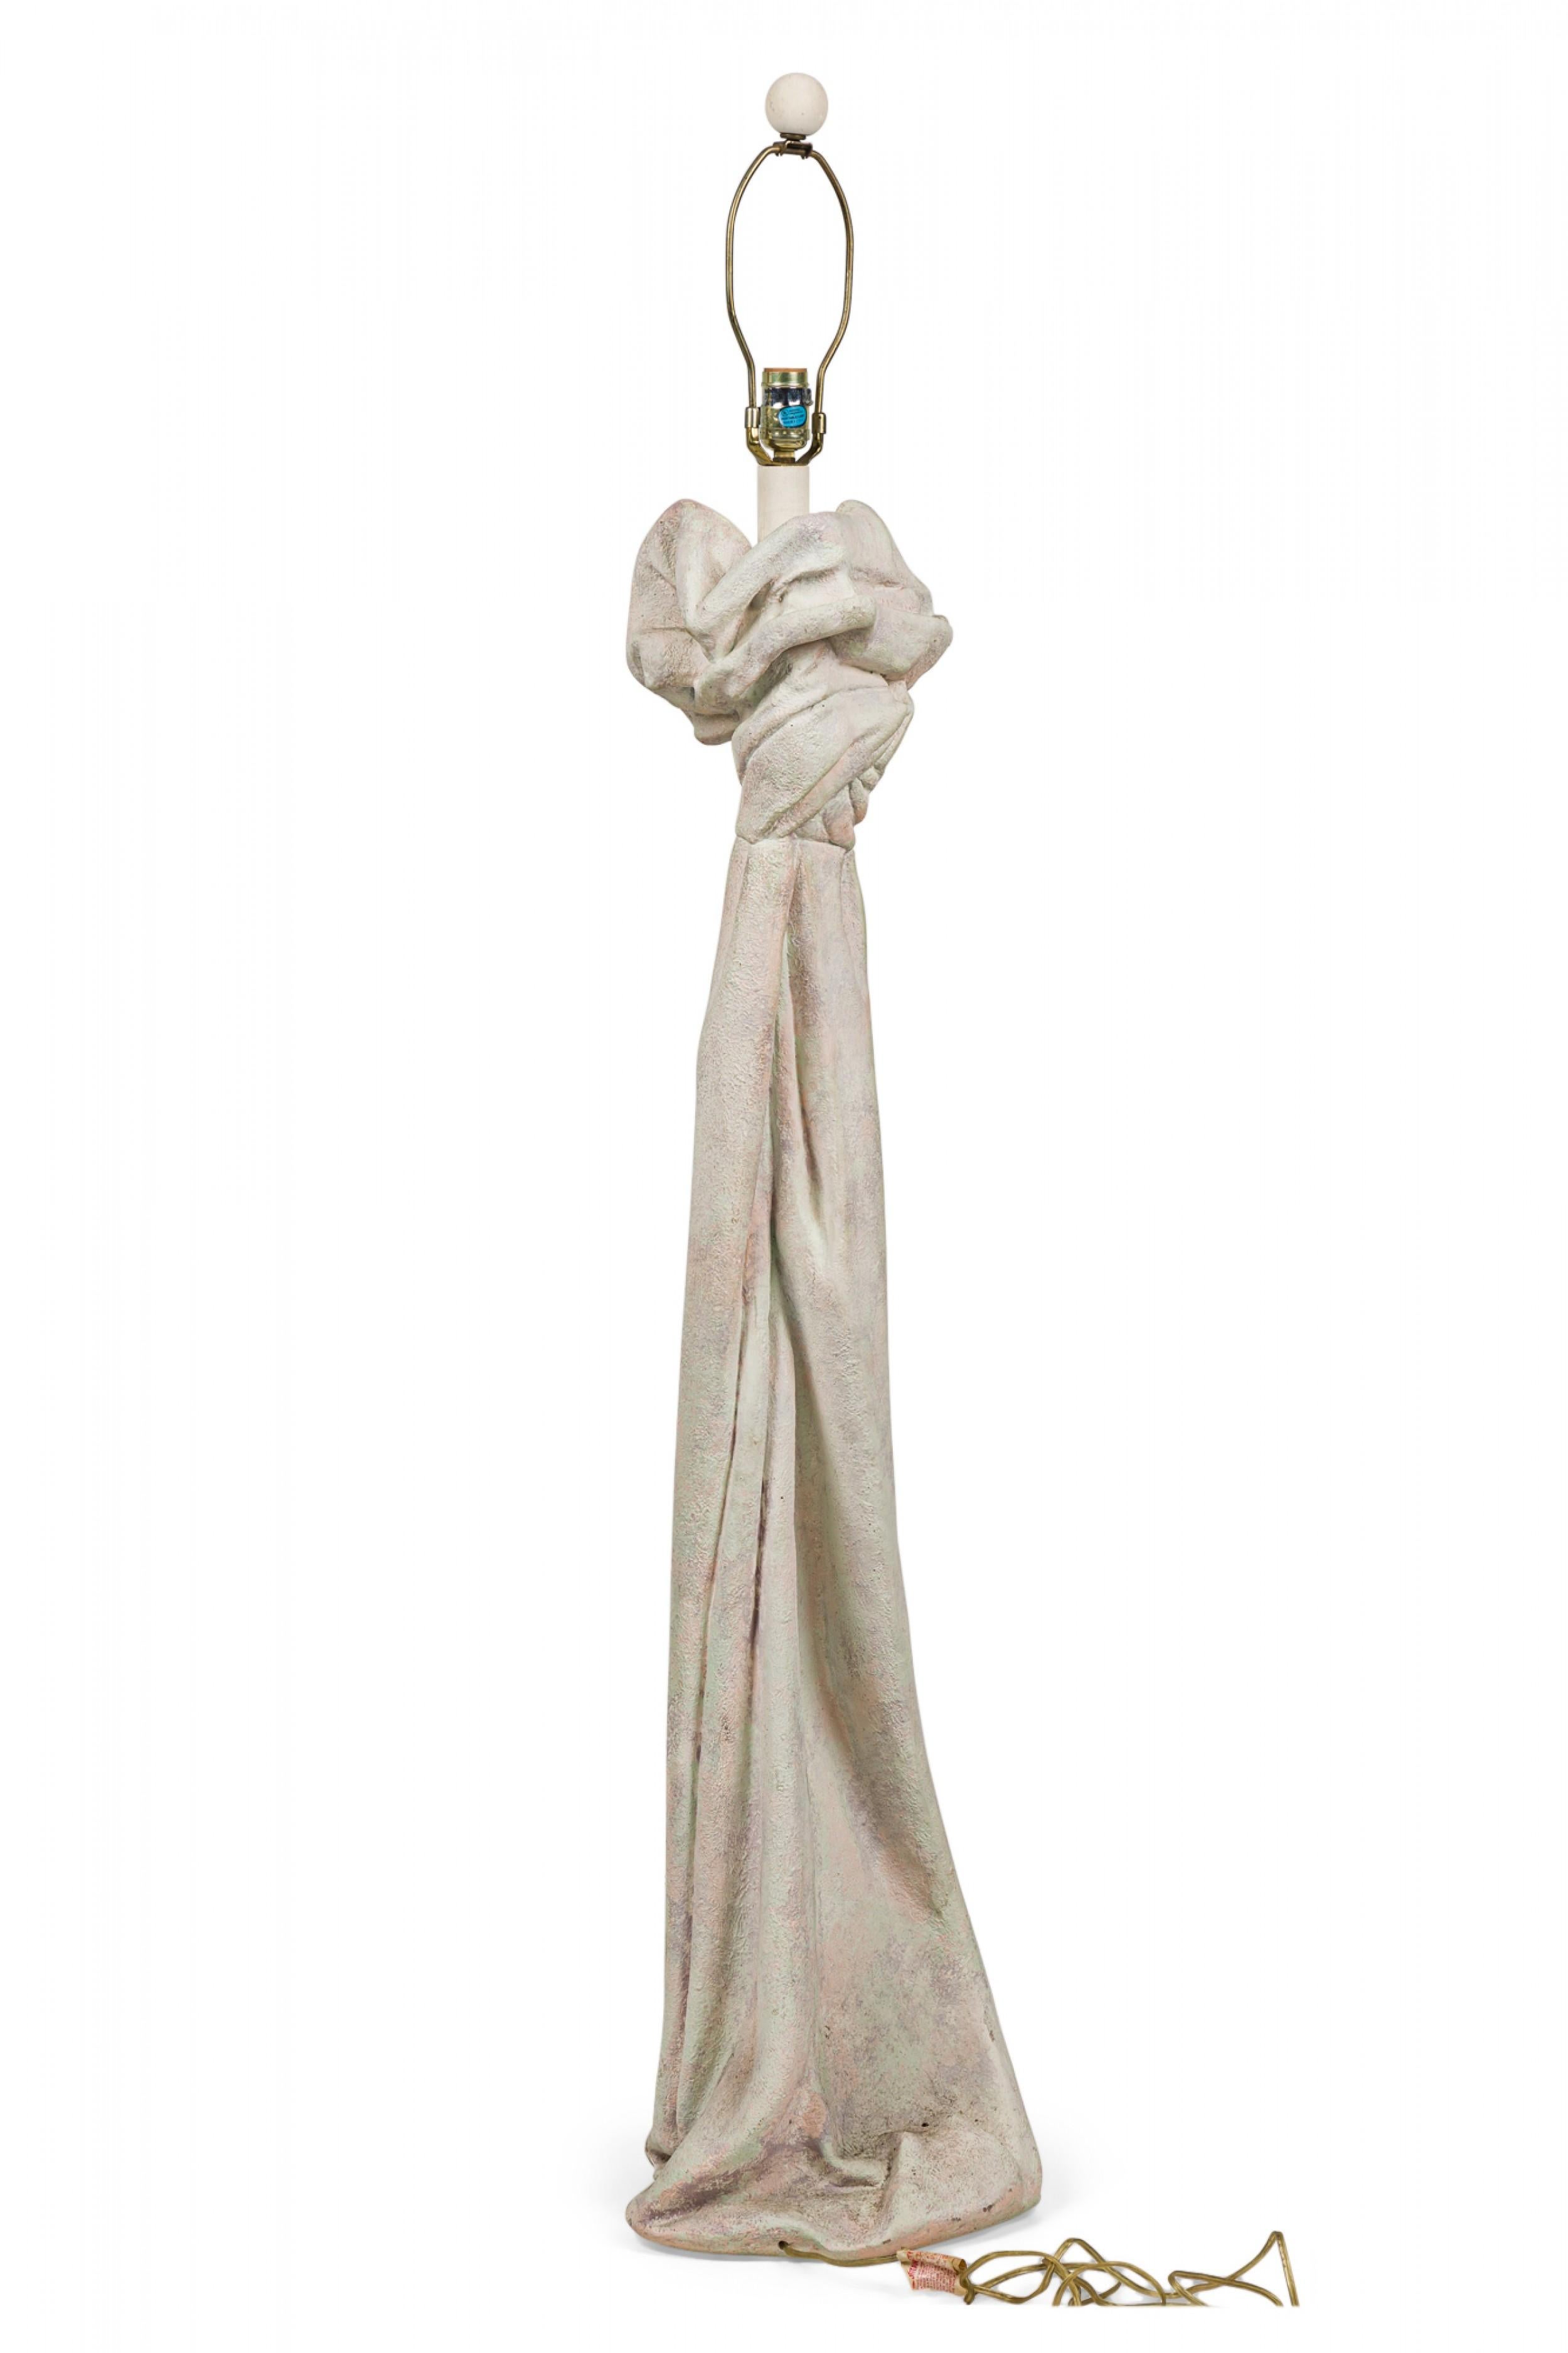 Midcentury American Plaster Knotted Drapery Floor Lamp In Good Condition For Sale In New York, NY